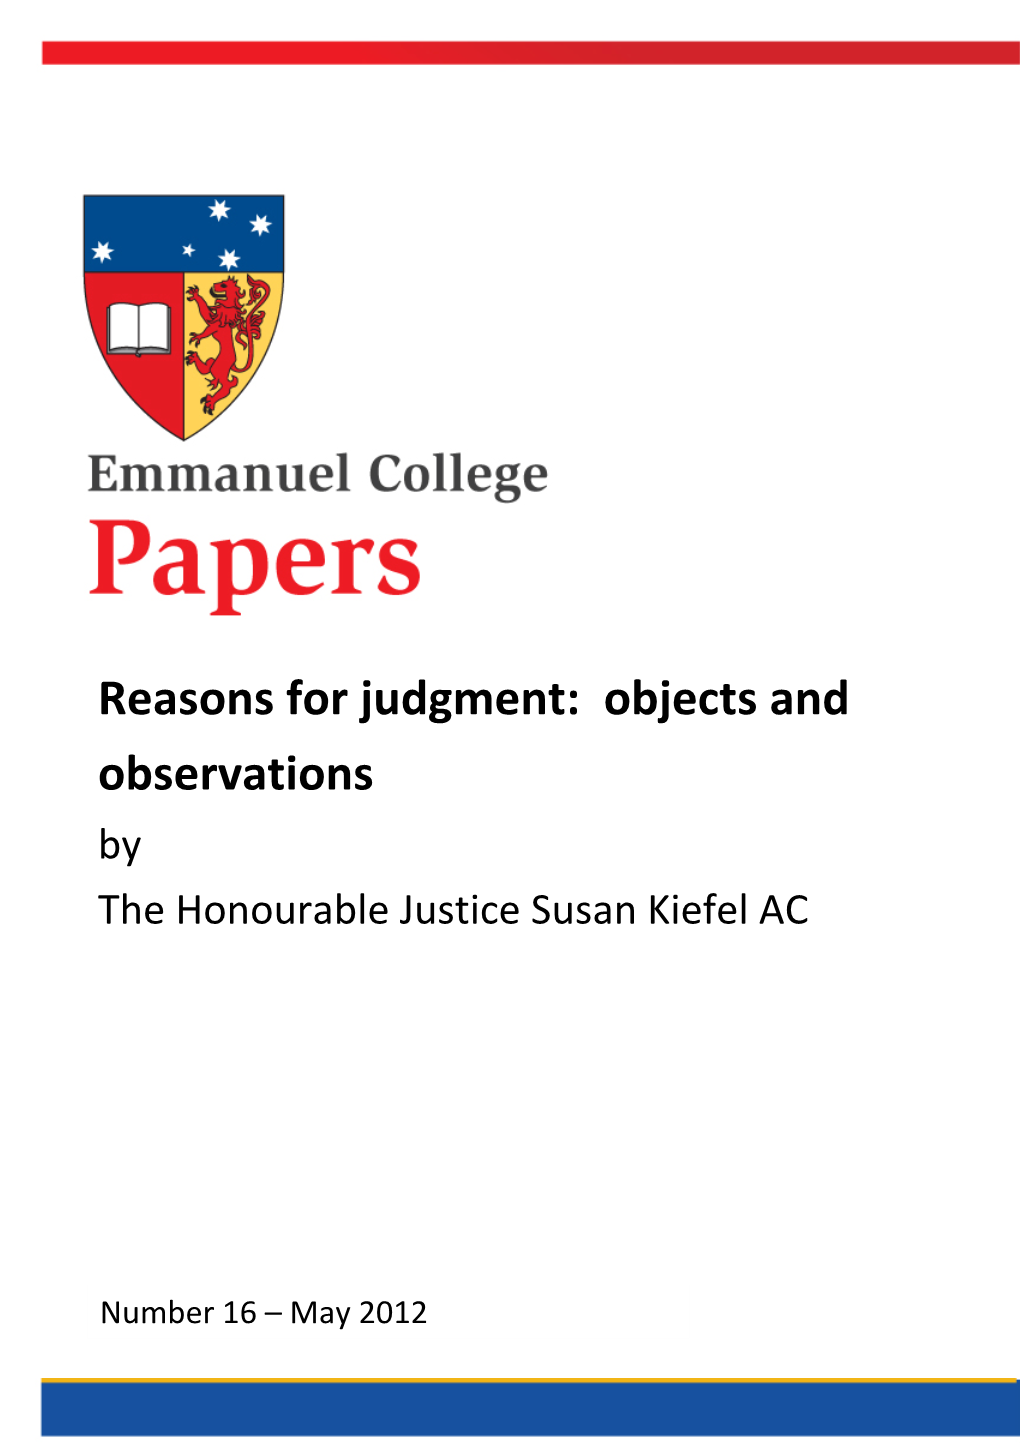 Reasons for Judgment: Objects and Observations by the Honourable Justice Susan Kiefel AC